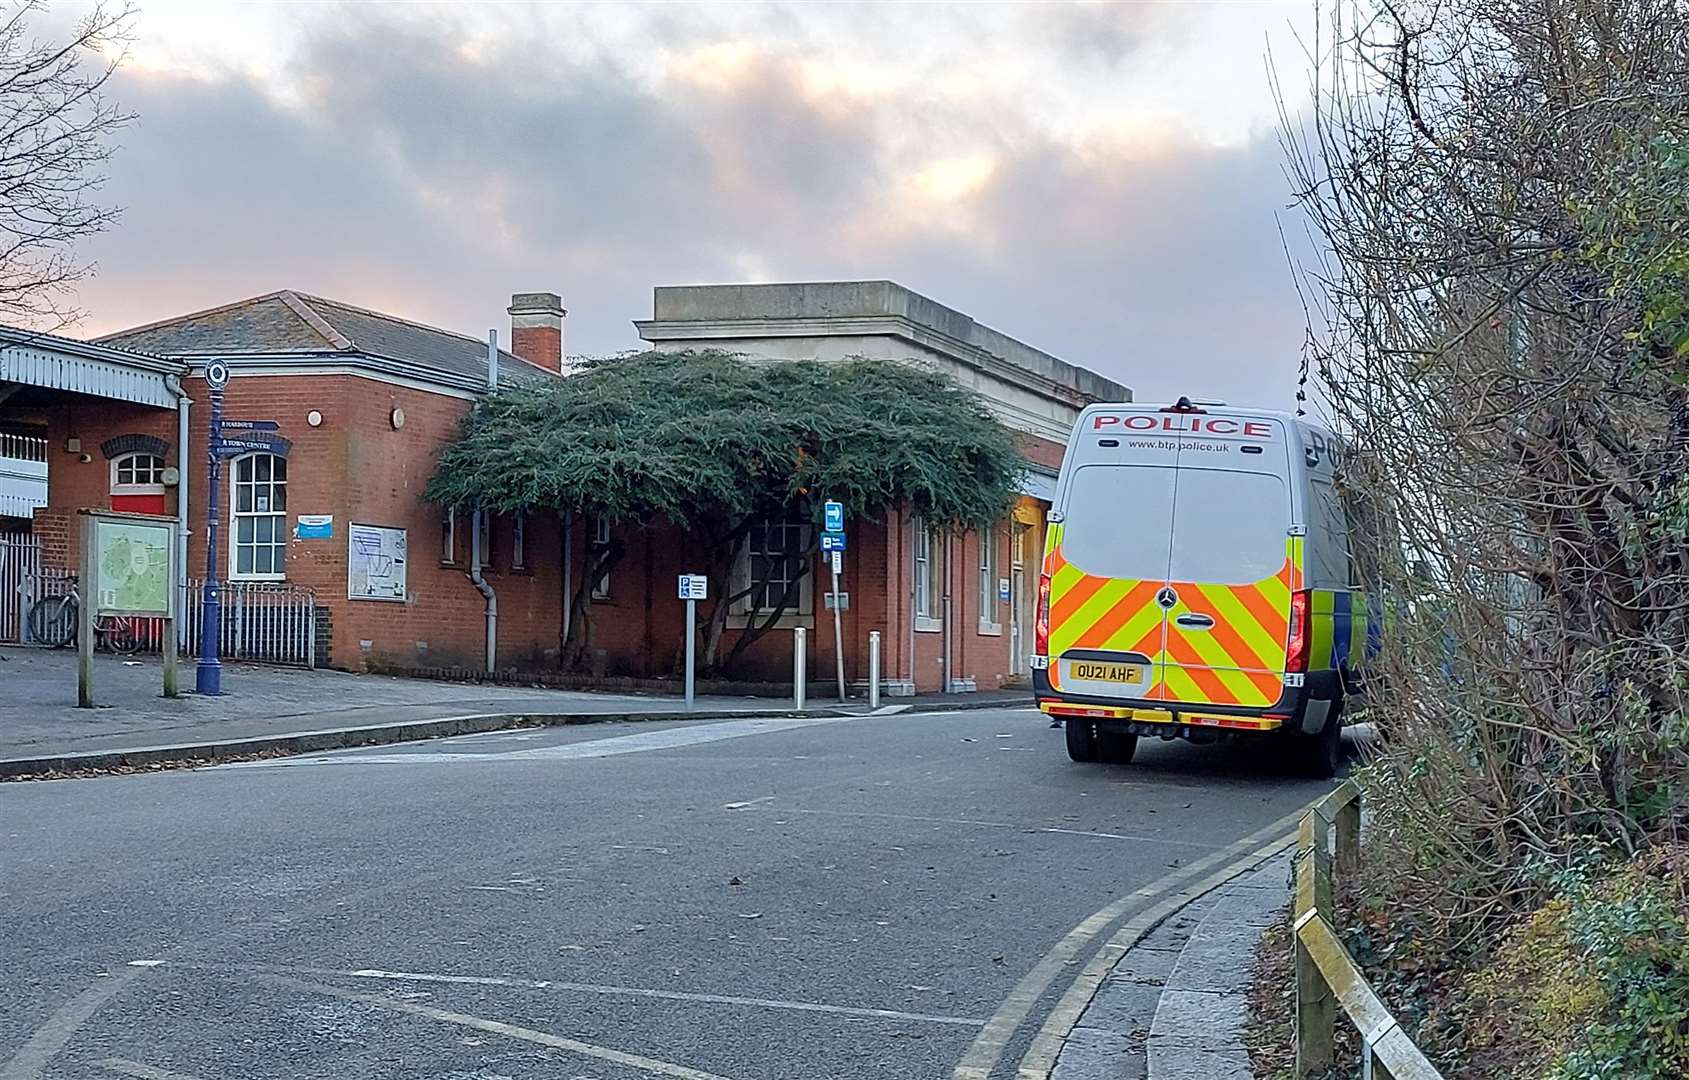 Police were seen outside Whitstable train station following the incident on December 17